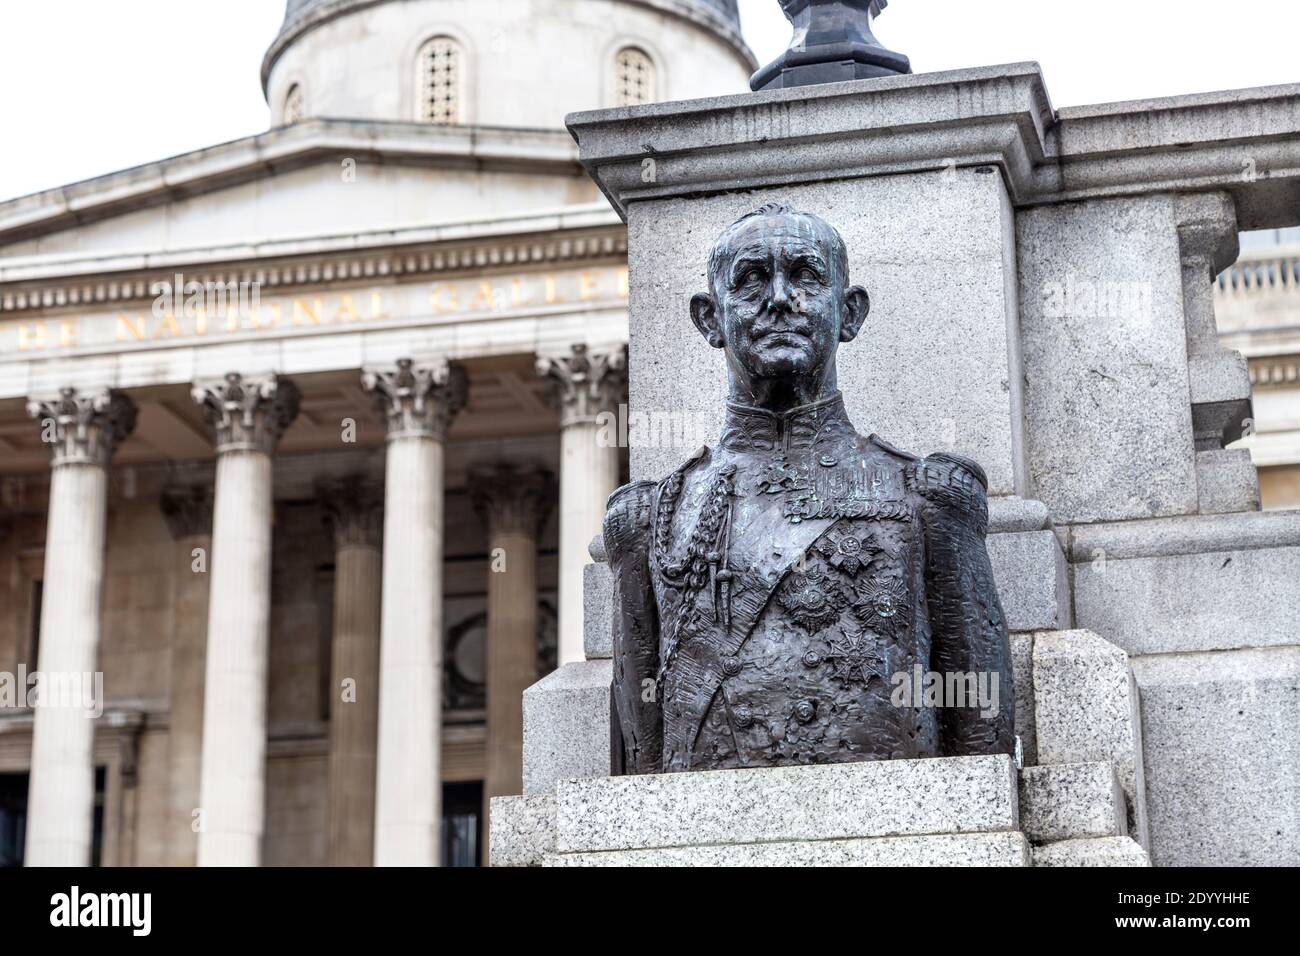 Bronze bust of Andrew Cunningham, 1st Viscount Cunningham of Hyndhope in Trafalgar Square in front of the National Gallery, London, UK Stock Photo